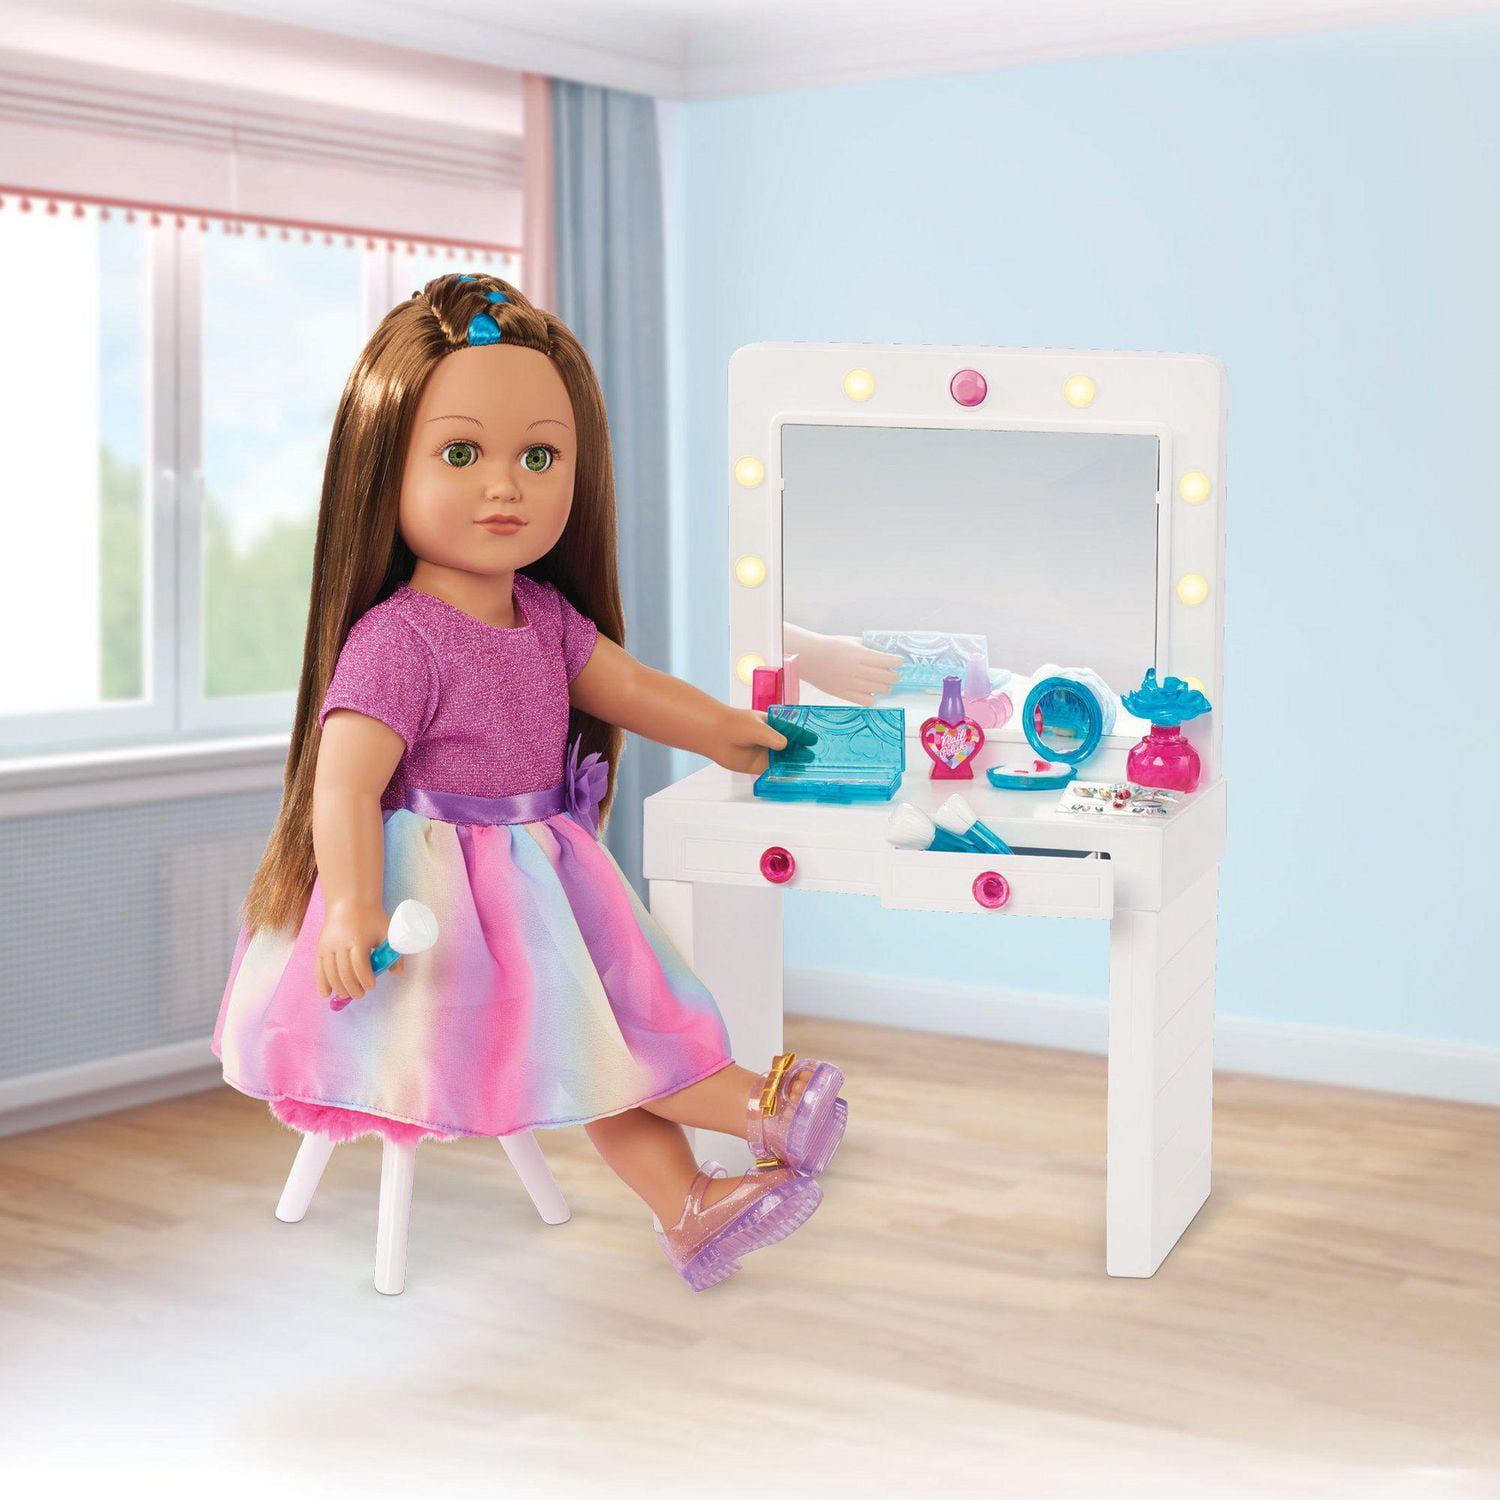 AG Doll Cleaning Routine with Laundry - Play Dolls chores for kids 